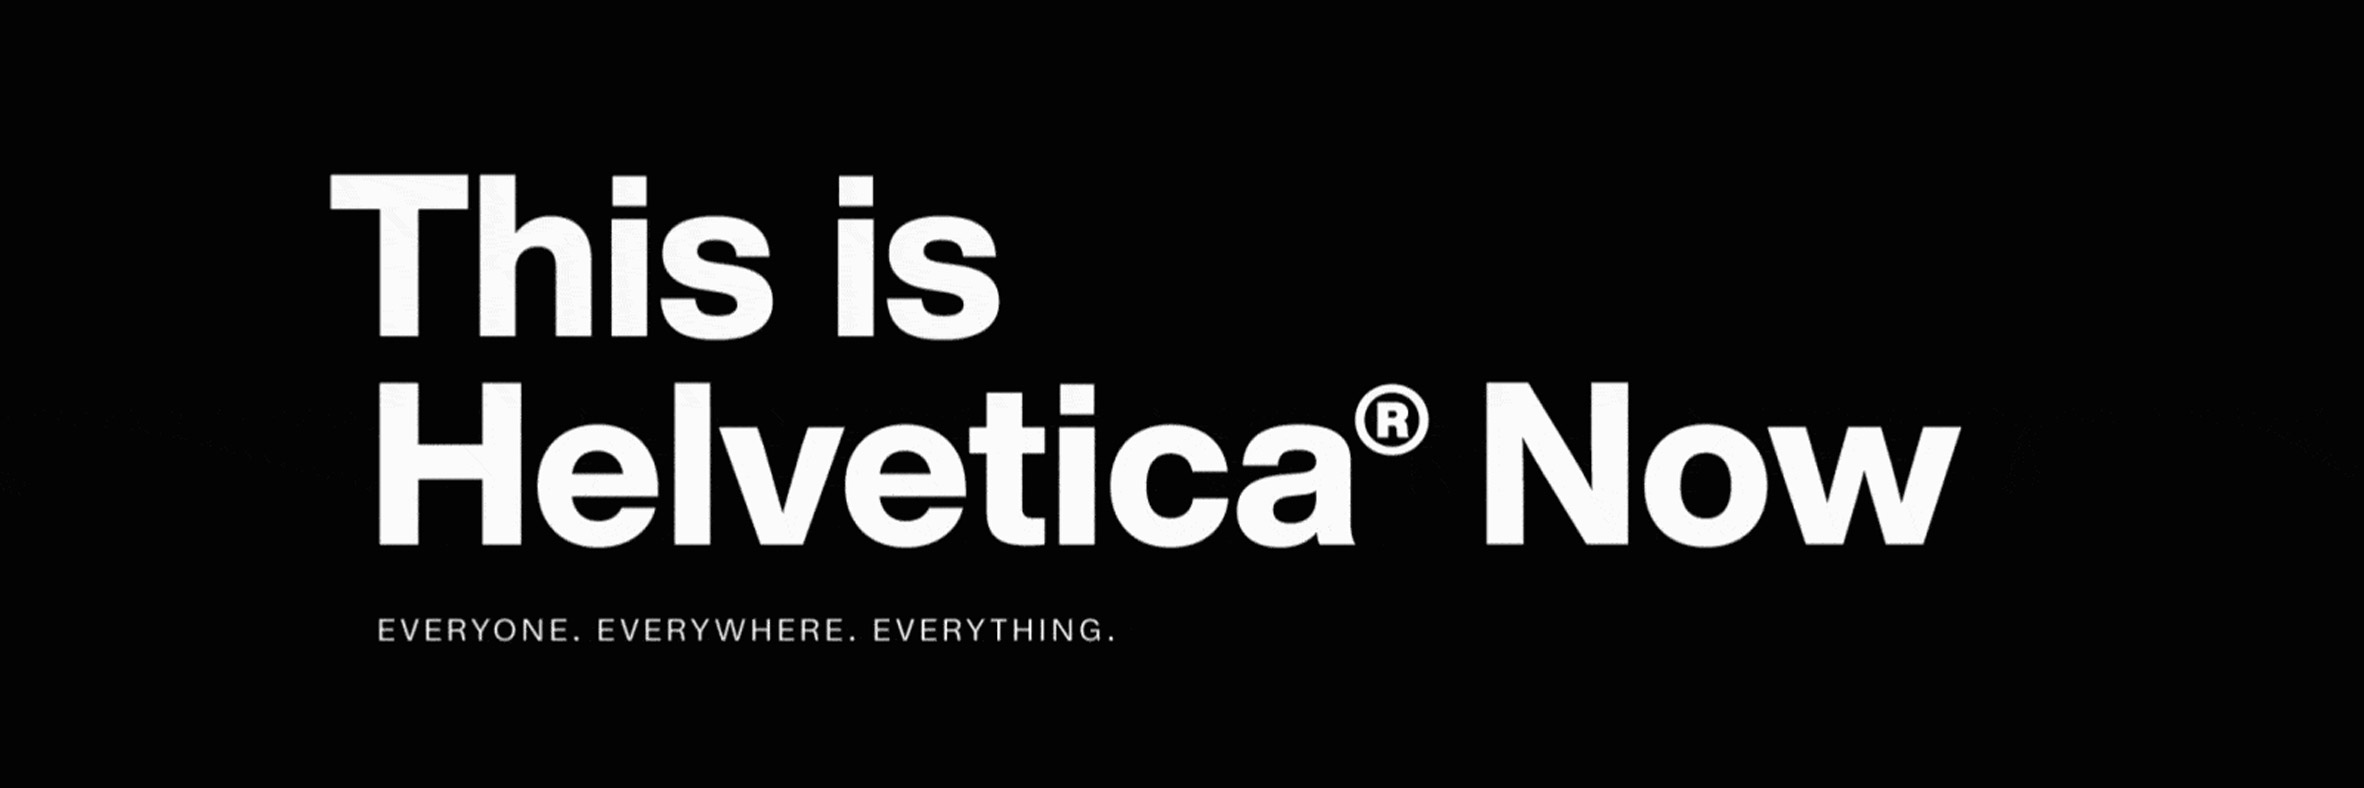 why helvetica now